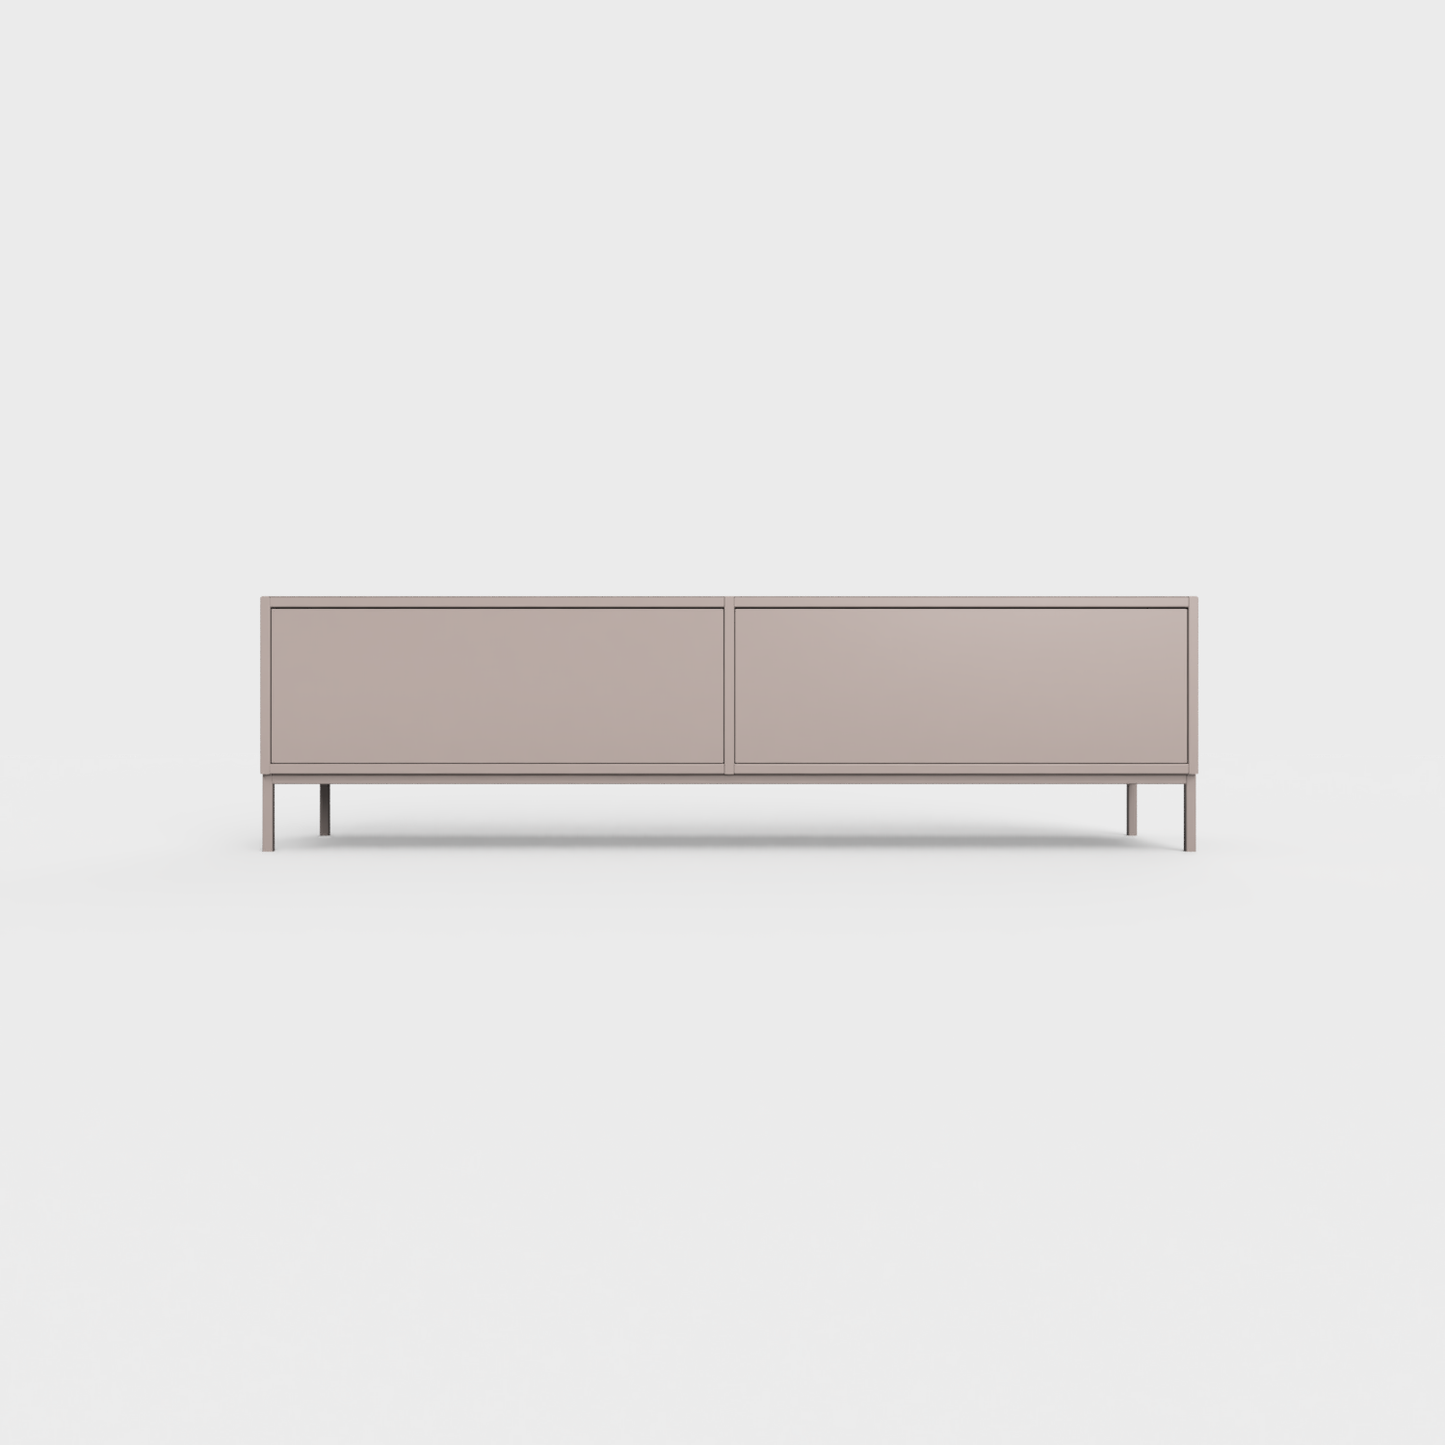 Prunus 01 Lowboard in Cold Beige color, powder-coated steel, elegant and modern piece of furniture for your living room